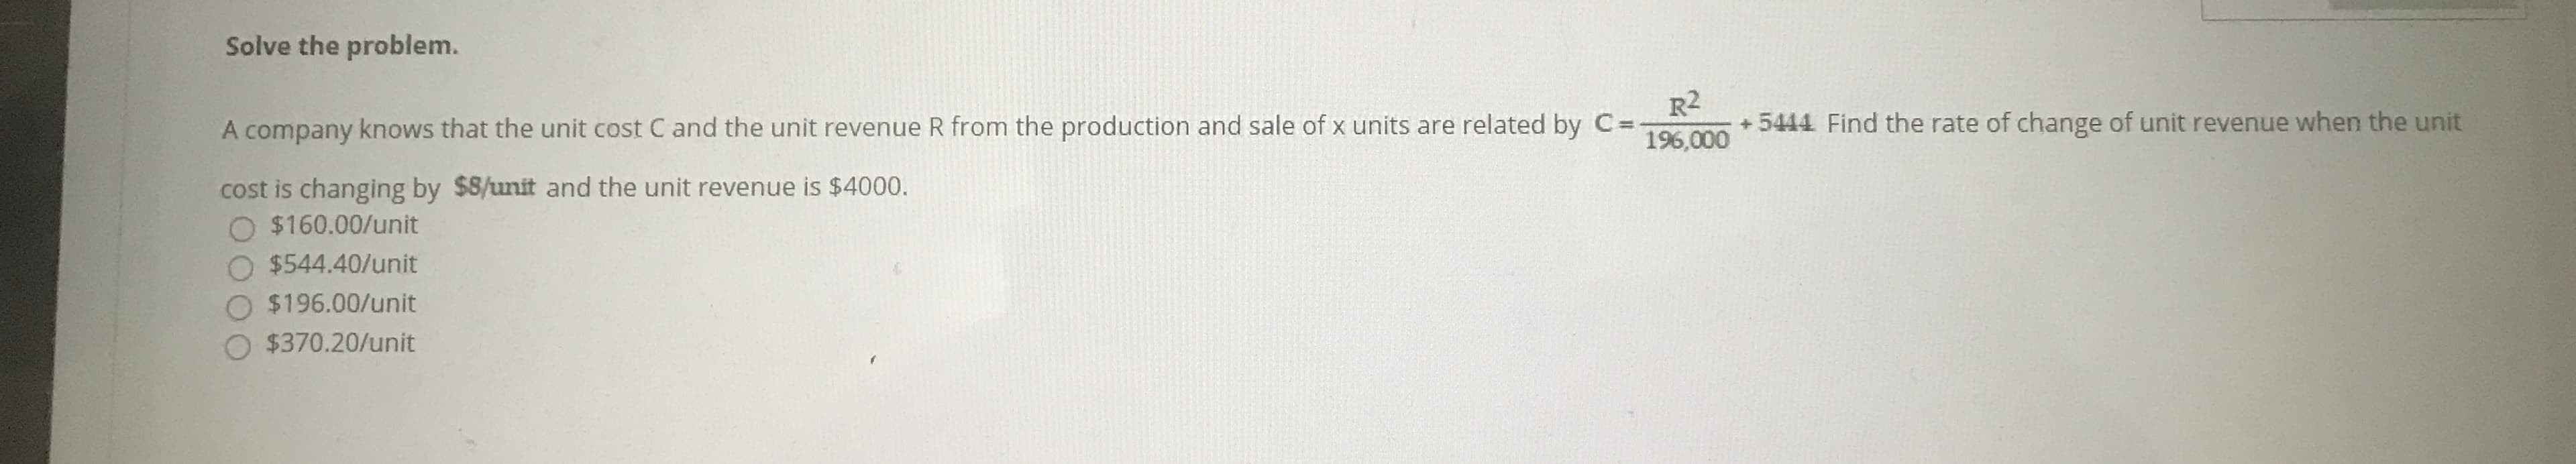 Solve the problem.
R2
+ 5444 Find the rate of change of unit revenue when the u
196,000
A company knows that the unit cost C and the unit revenue R from the production and sale of x units are related by C=
cost is changing by $8/unit and the unit revenue is $4000.
O $160.00/unit
O $544.40/unit
O $196.00/unit
$370.20/unit
